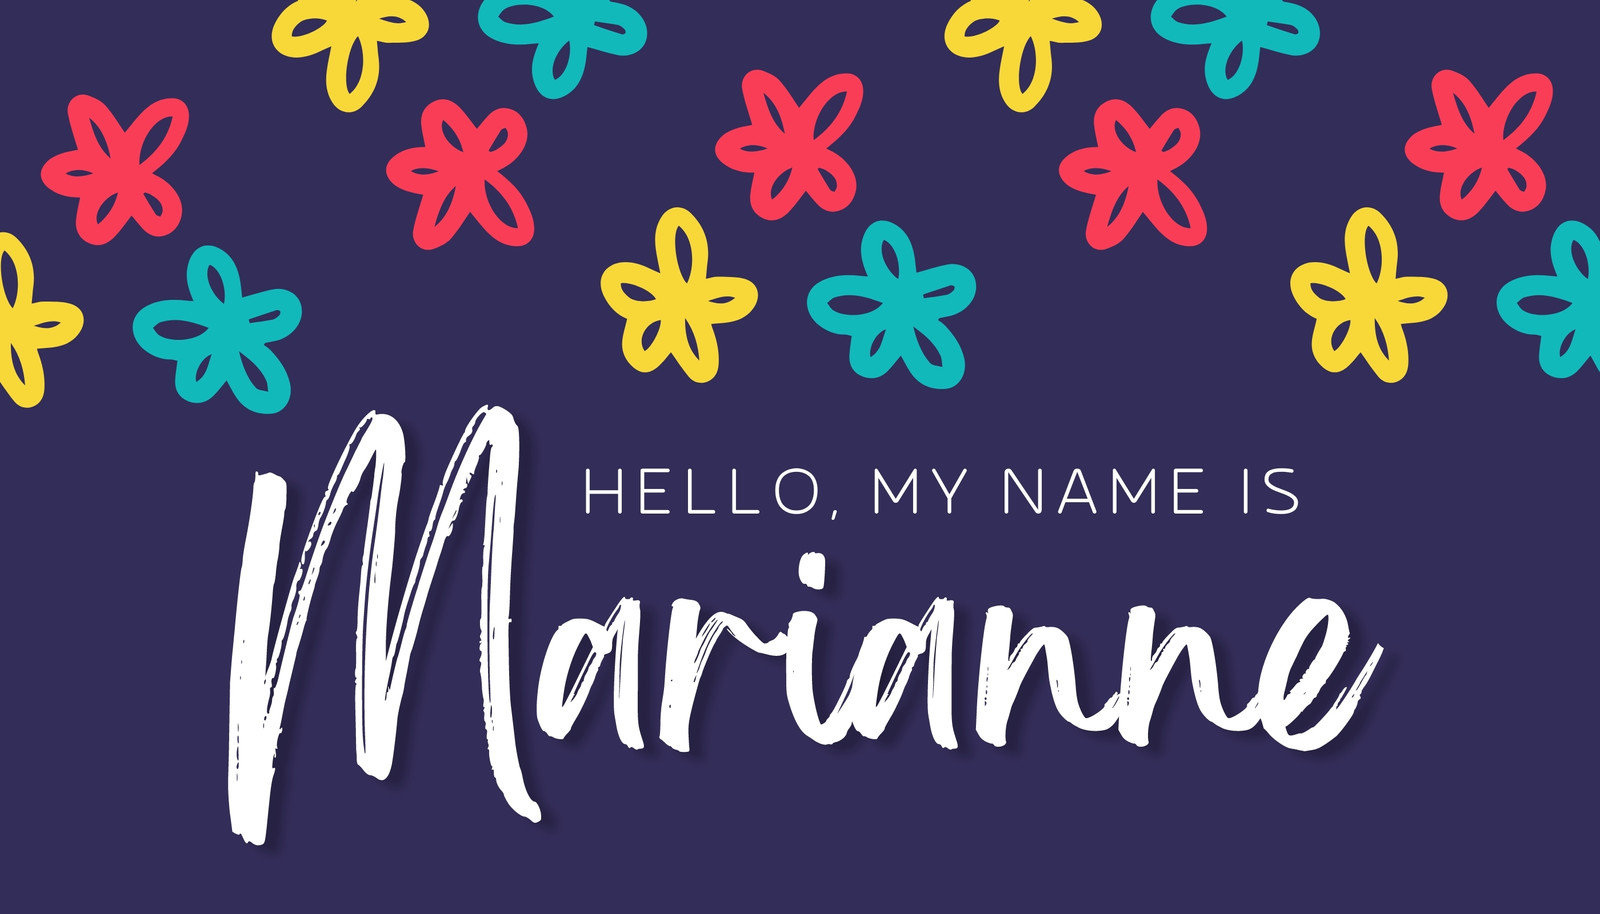 Free Name Tag Maker - Create Name Tags Online